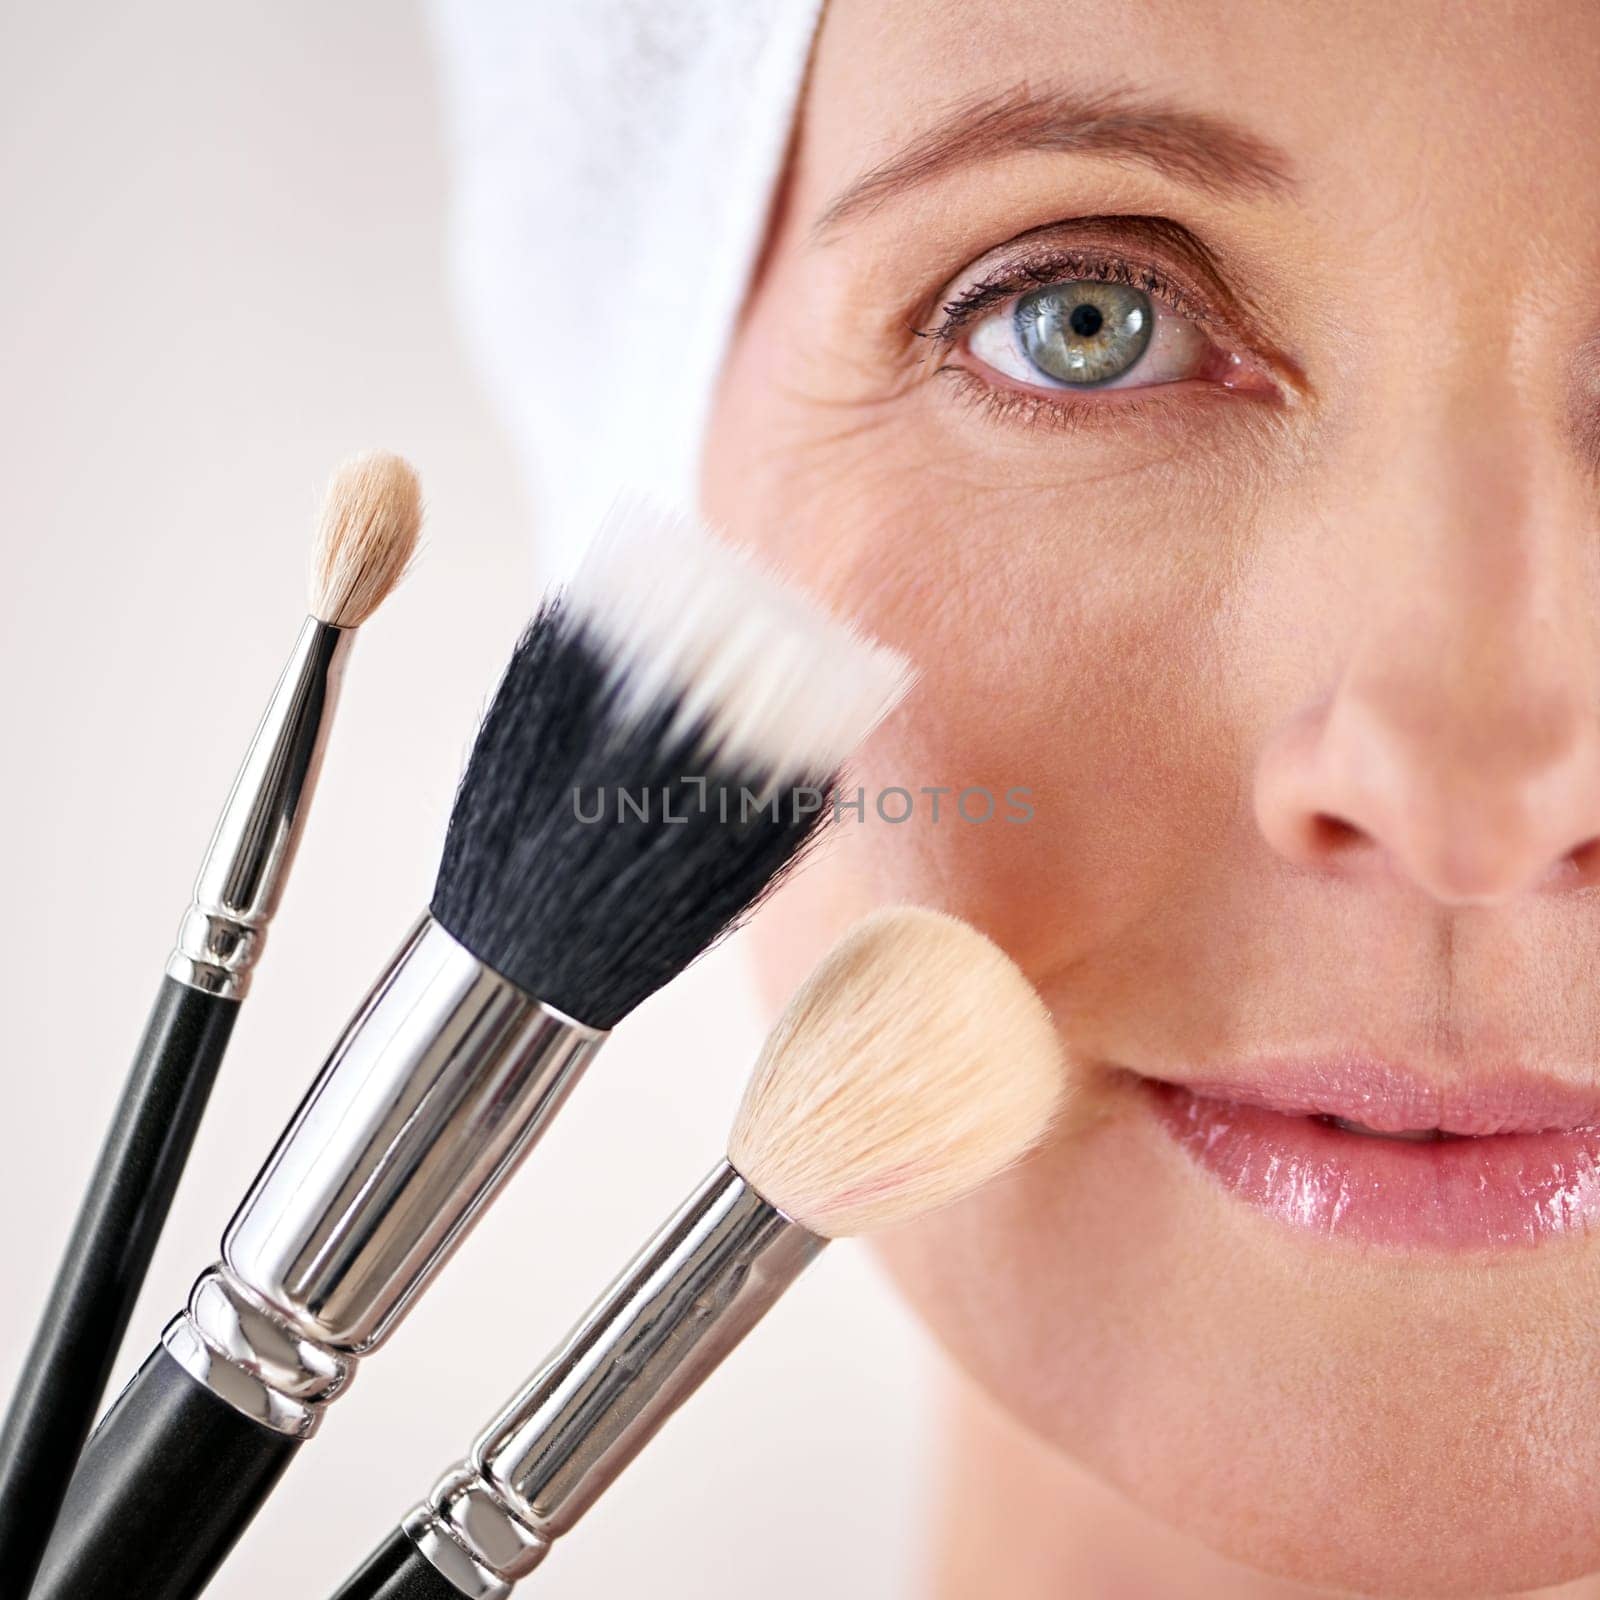 Beauty time. Closeup studio portrait of a mature woman posing with a set of makeup brushes. by YuriArcurs